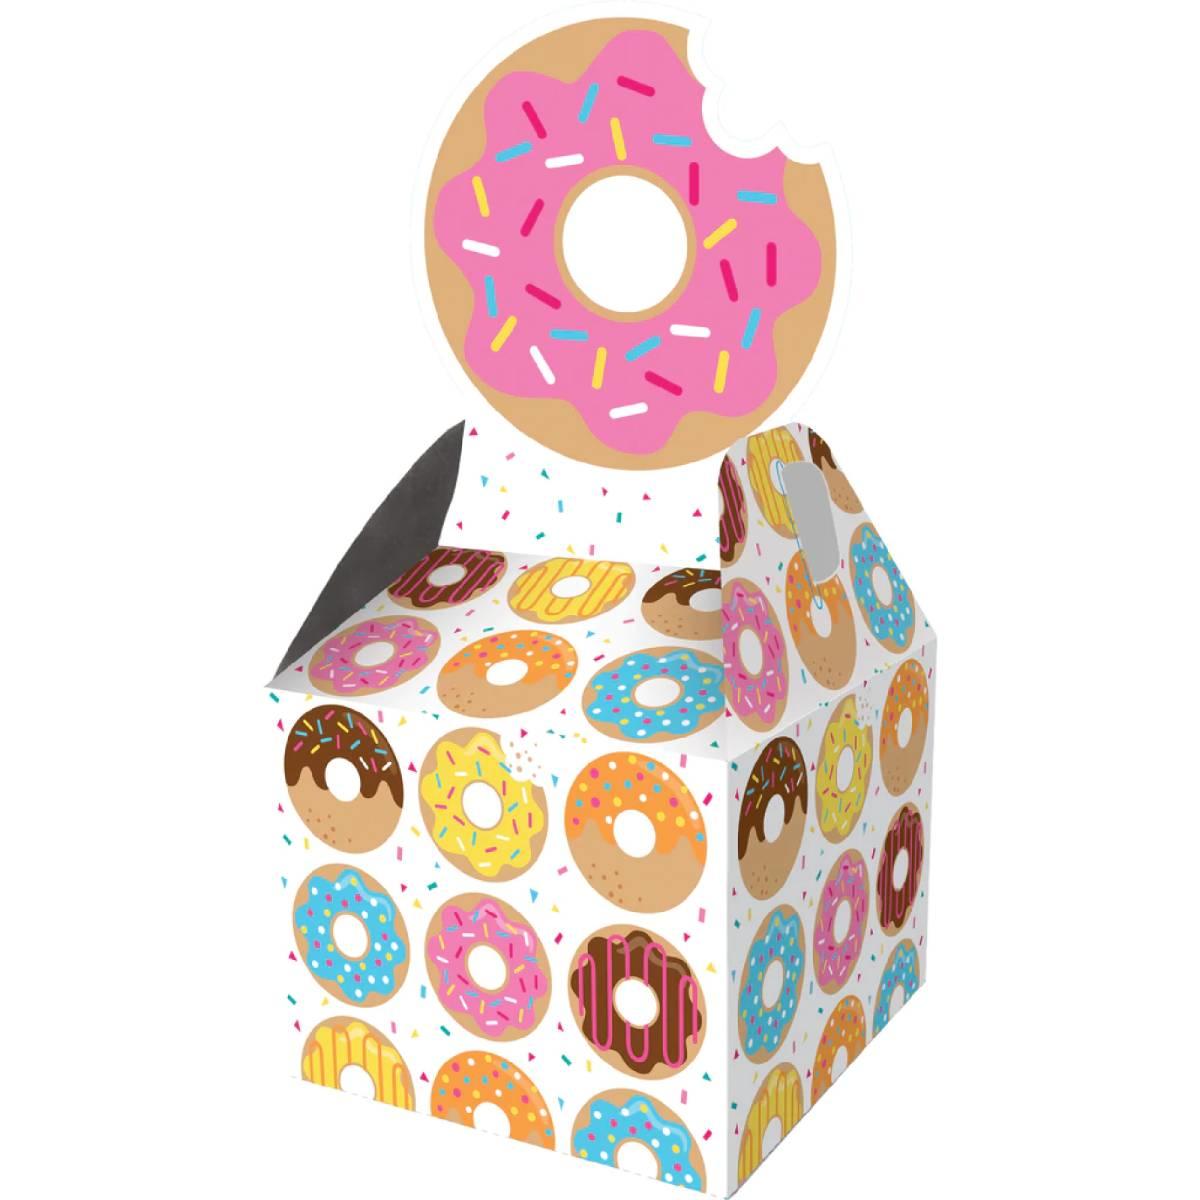 Doughnut Time Party Favour Boxes pk8 by Creative Party PC324233 available here at Karnival Costumes online party shop